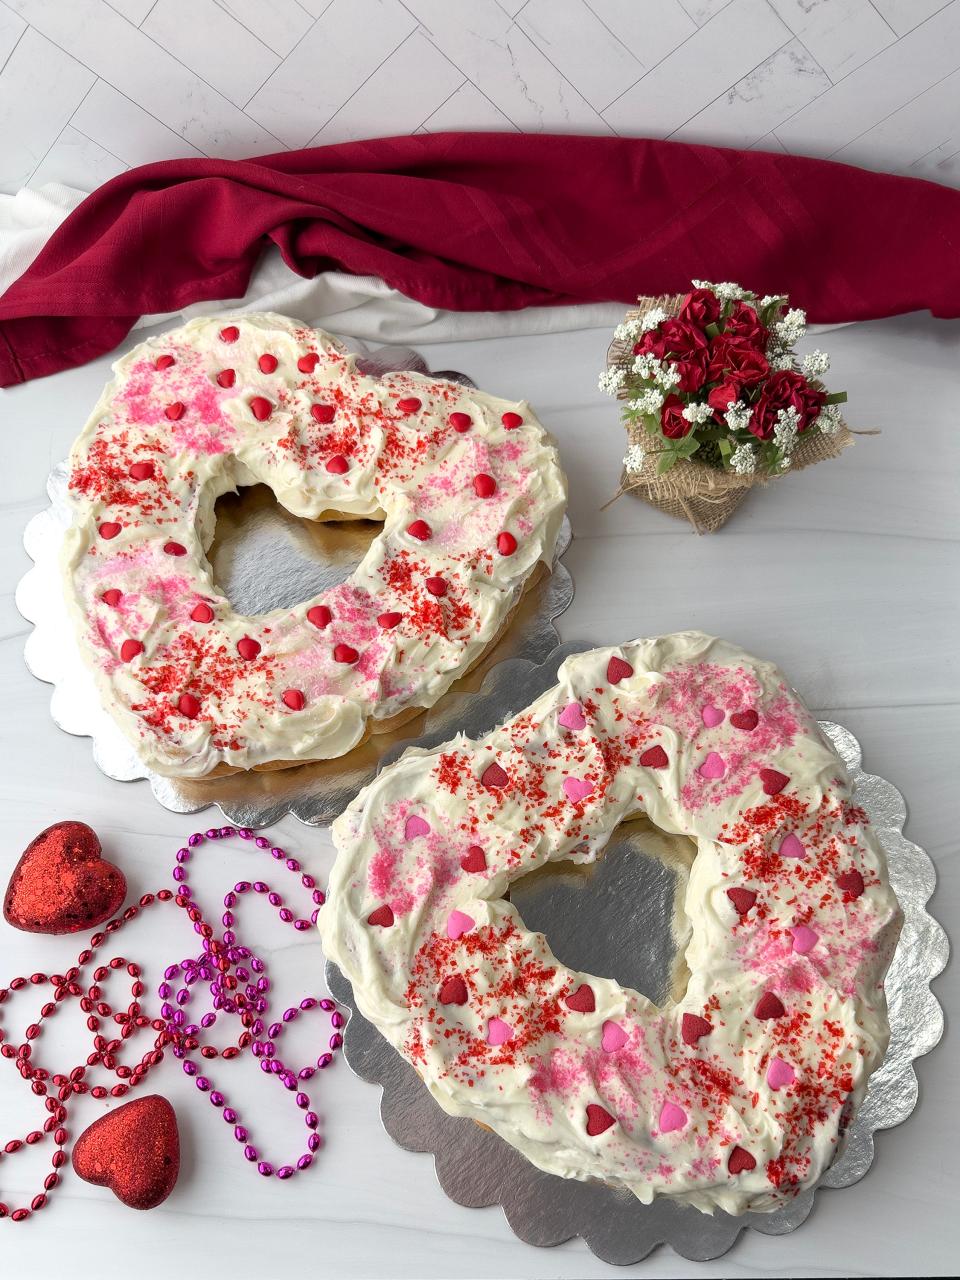 Celebrate Valentine's Day and Mardi Gras with Sweetheart King Cakes.